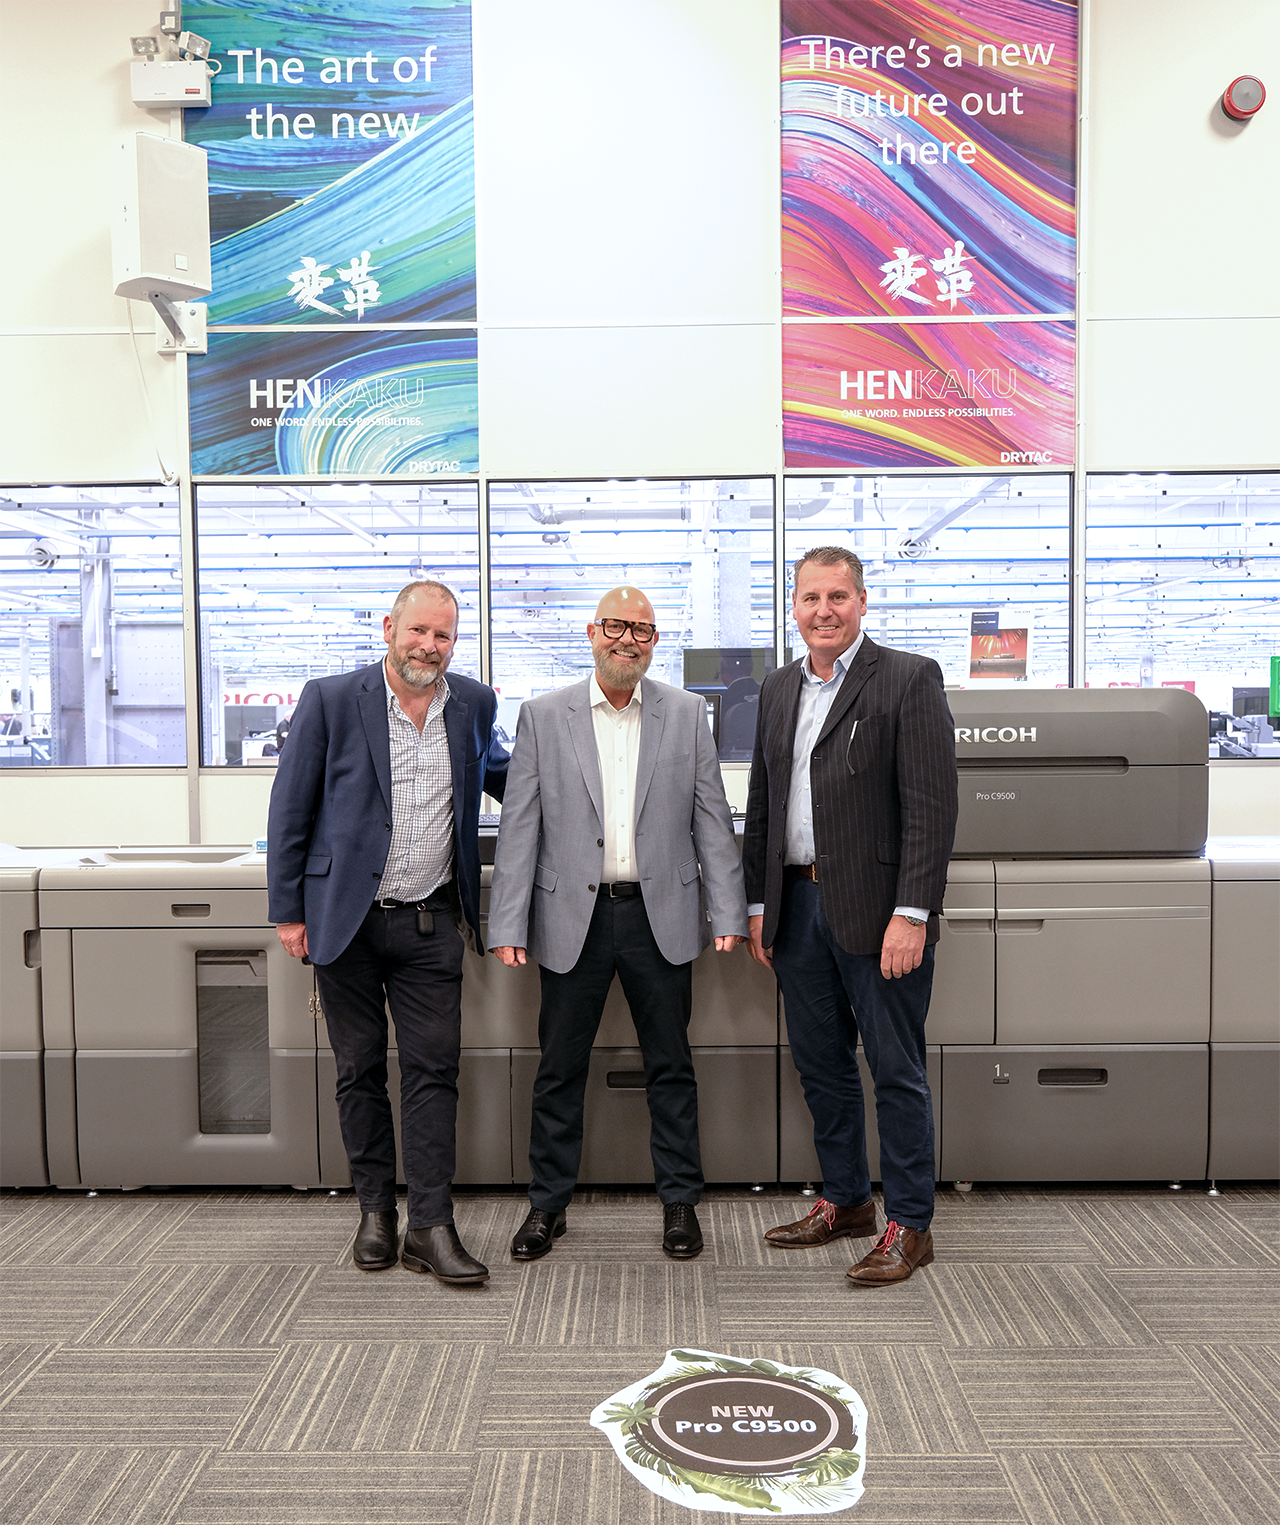 Latcham, one of the UK's leading professional print businesses, extends its Ricoh partnership with investment in new technology